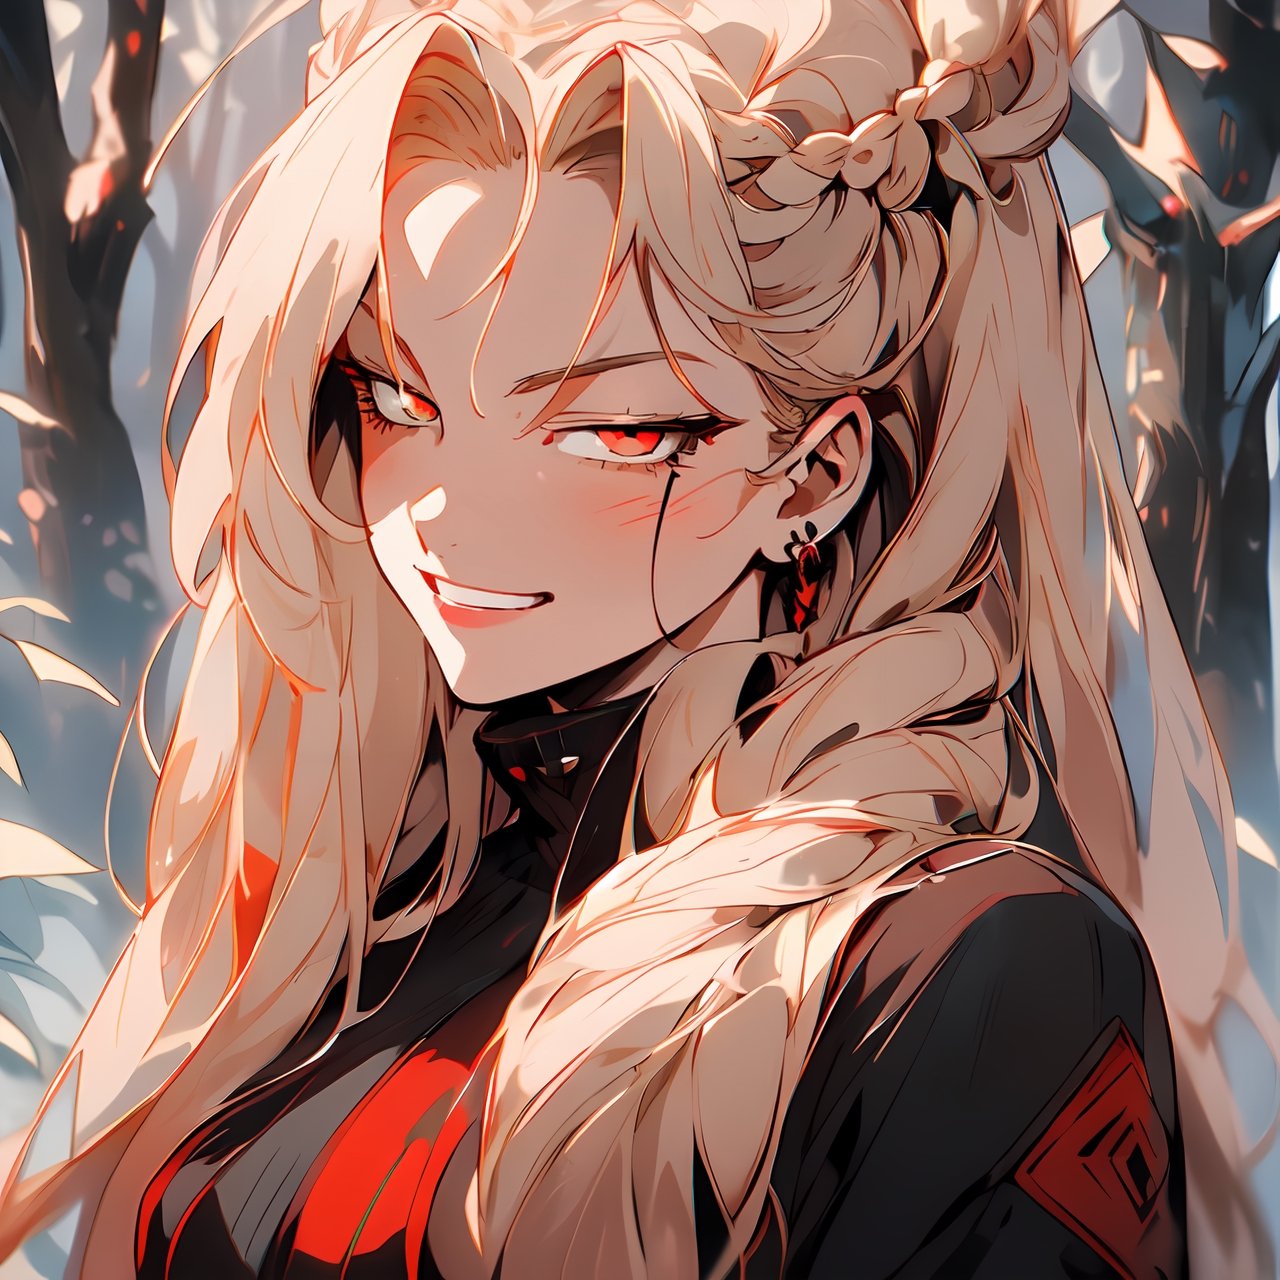 (Hunter clothing),  (long blonde hair),  (braided hairstyle),  red_eyes,  bright eyes,  hunter style custom,  (Assassin's eyes), (maniac smile) ,  sharpest quality,  extremely detailed,  high resolution, 1 girl,  (satisfied_expression),  (agresive_attitude),  dark forest background,  bright atmosphere.,1 girl,retro